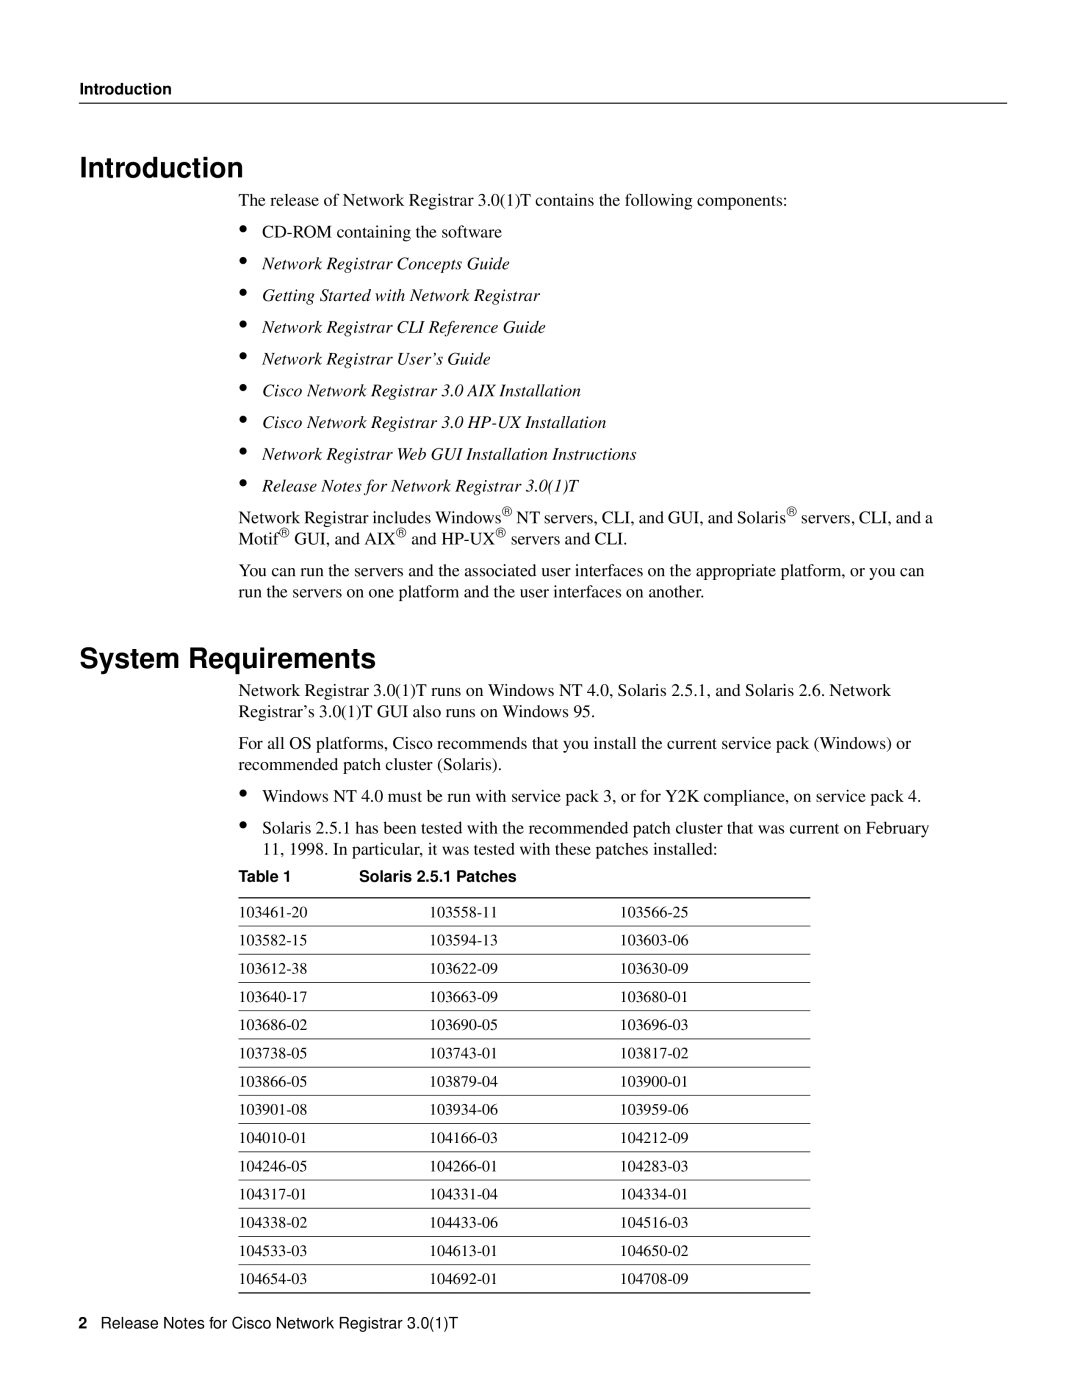 Cisco Systems 3.0(1) manual Introduction, System Requirements, Network Registrar Concepts Guide 